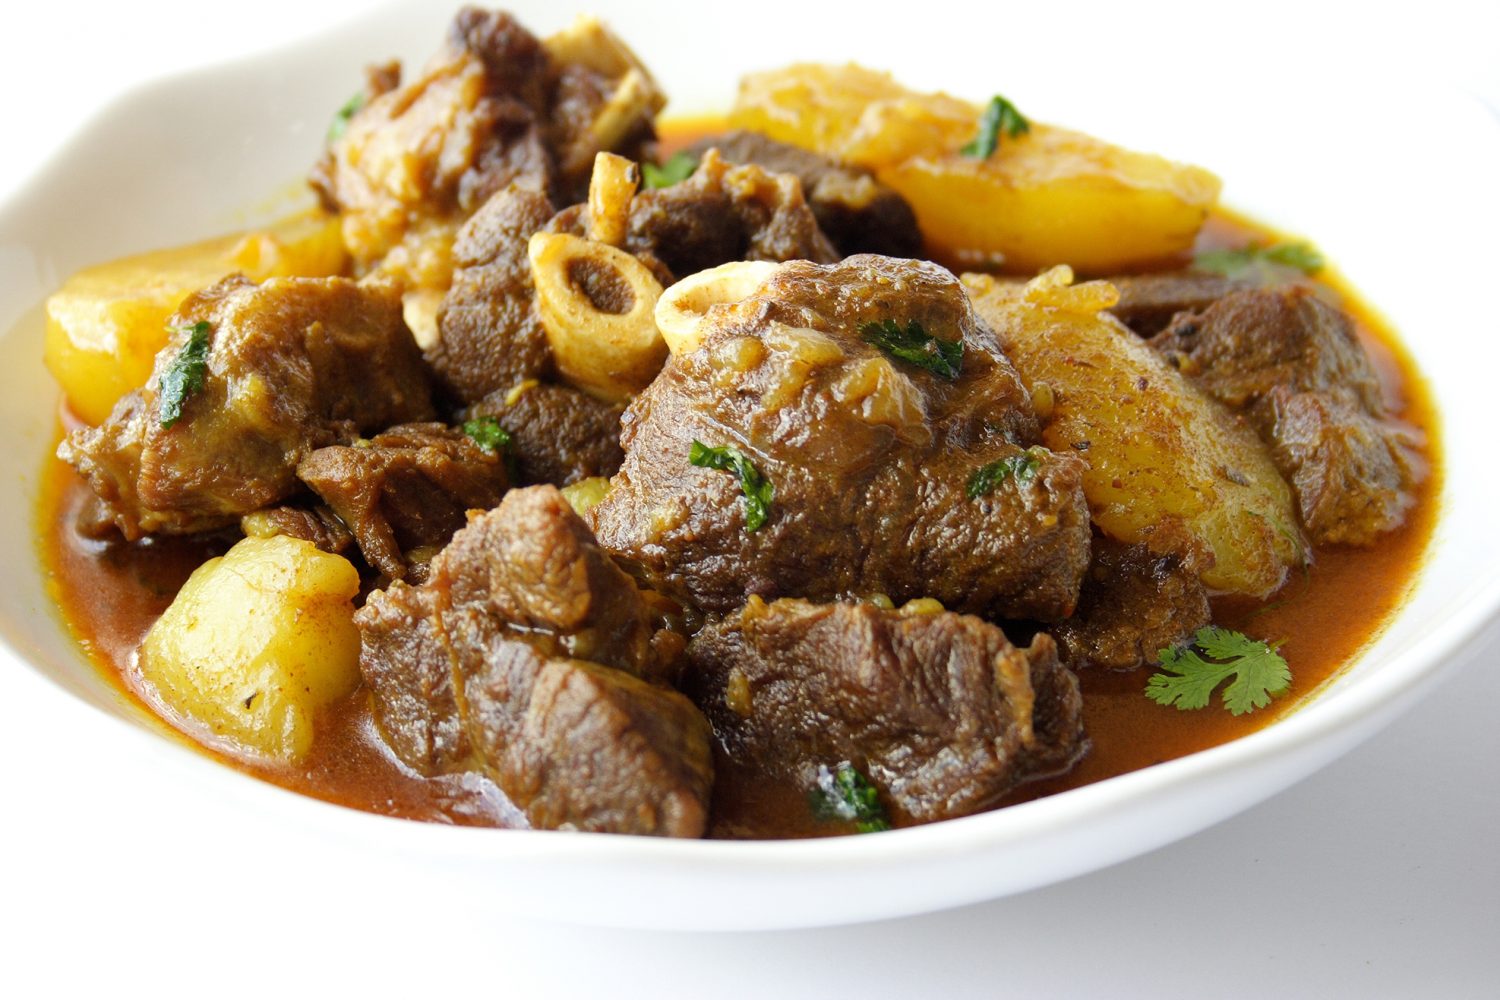 Pressure cooked Curried Lamb with Potatoes (Photo by Cynthia Nelson)